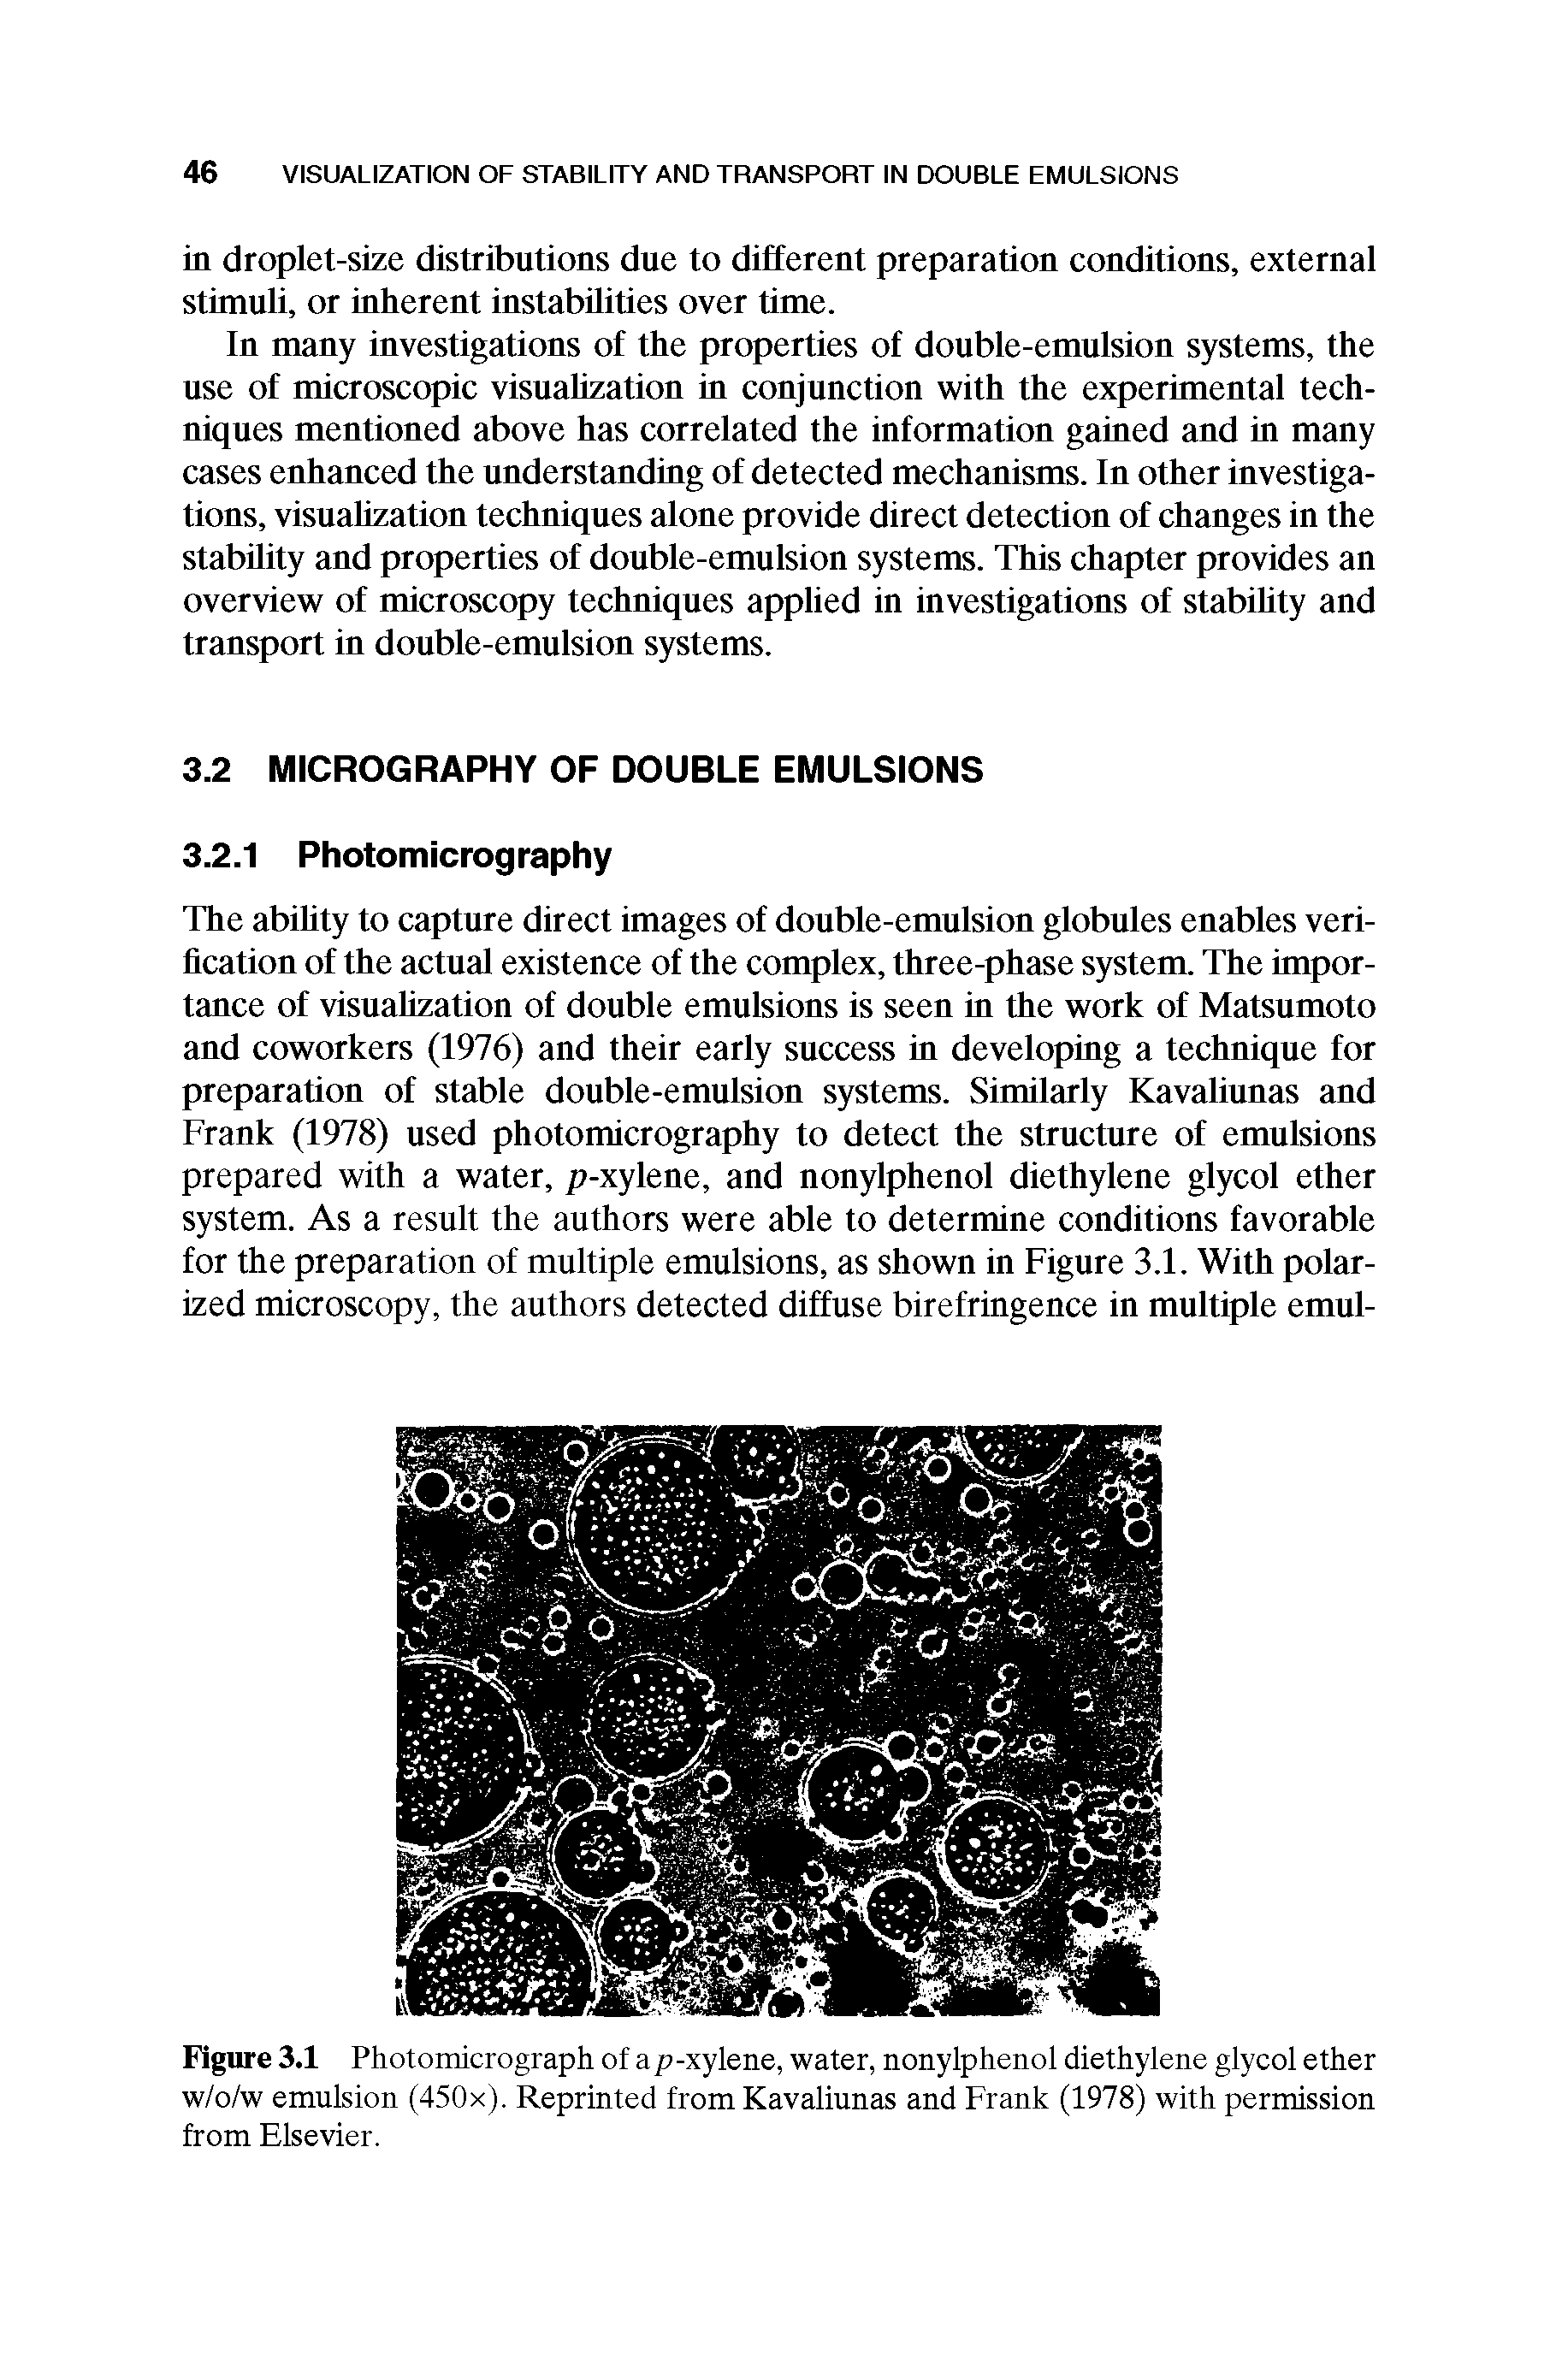 Figure 3.1 Photomicrograph of ap-xylene, water, nonylphenol diethylene glycol ether w/o/w emulsion (450x). Reprinted from Kavaliunas and Frank (1978) with permission from Elsevier.